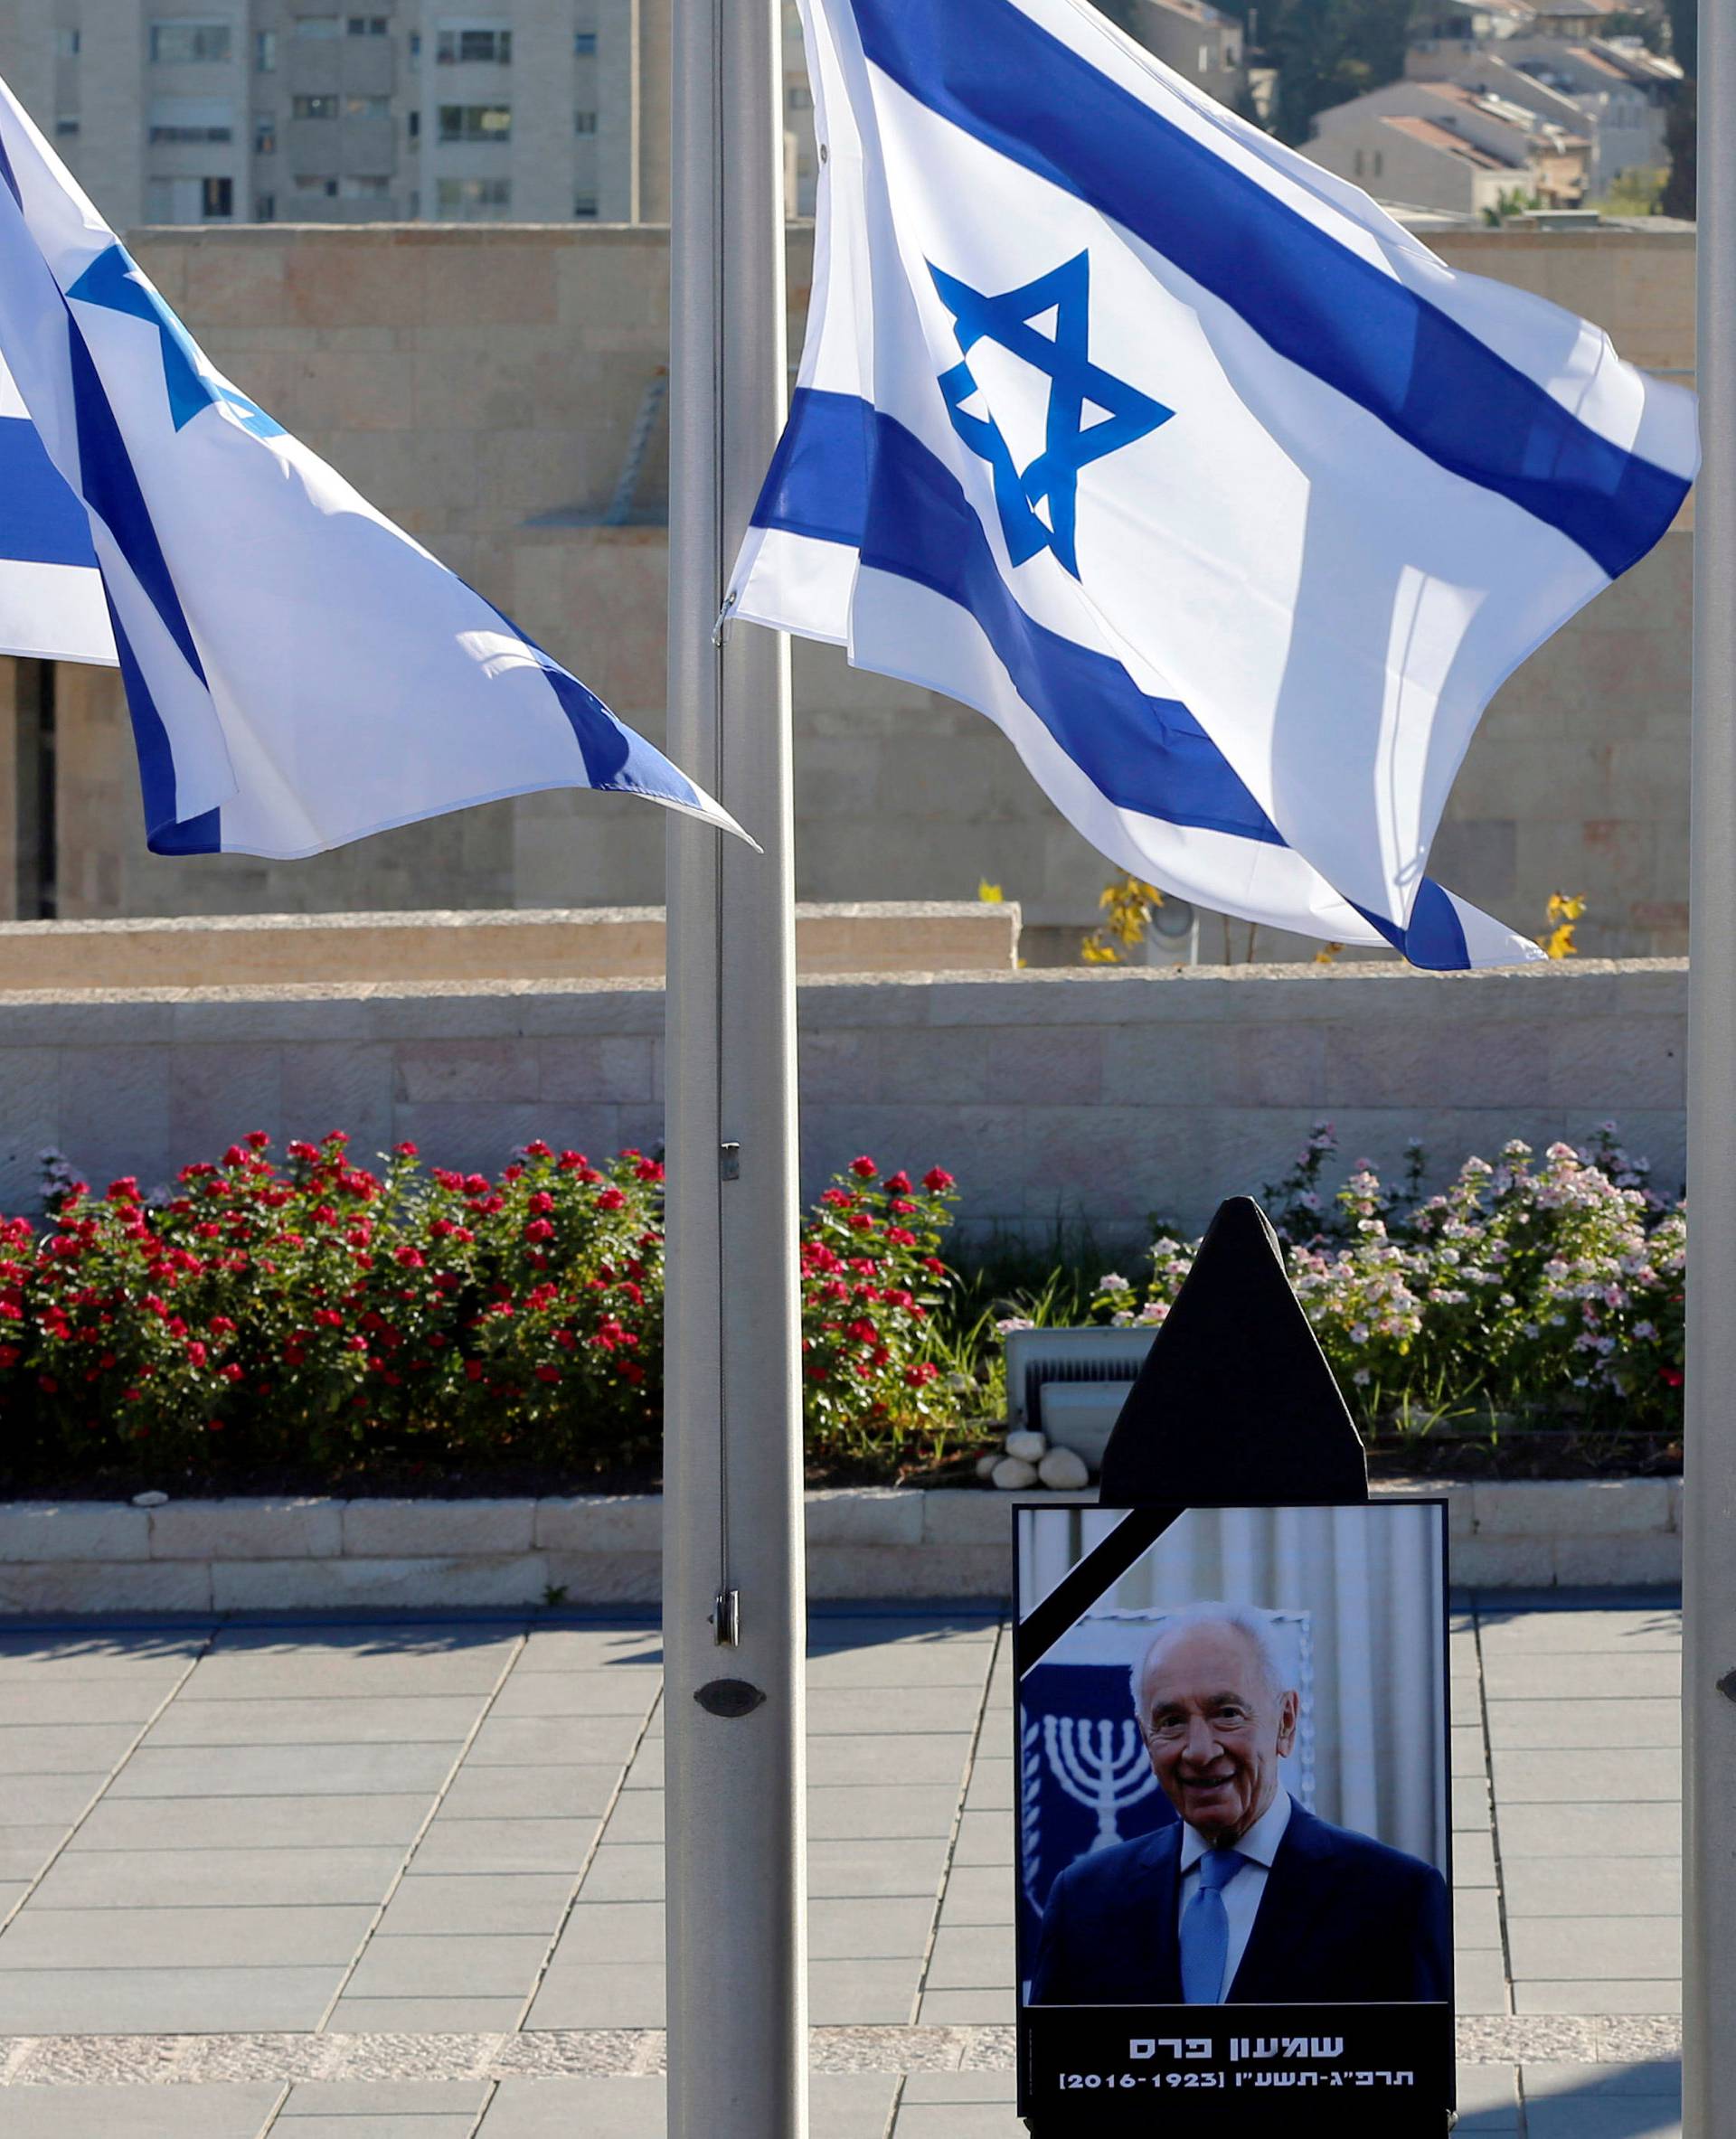 A portrait of former Israeli President Shimon Peres is seen near Israeli flags lowered to half mast at the Knesset plaza, the Israeli parliament, ahead of his funeral, in Jerusalem 